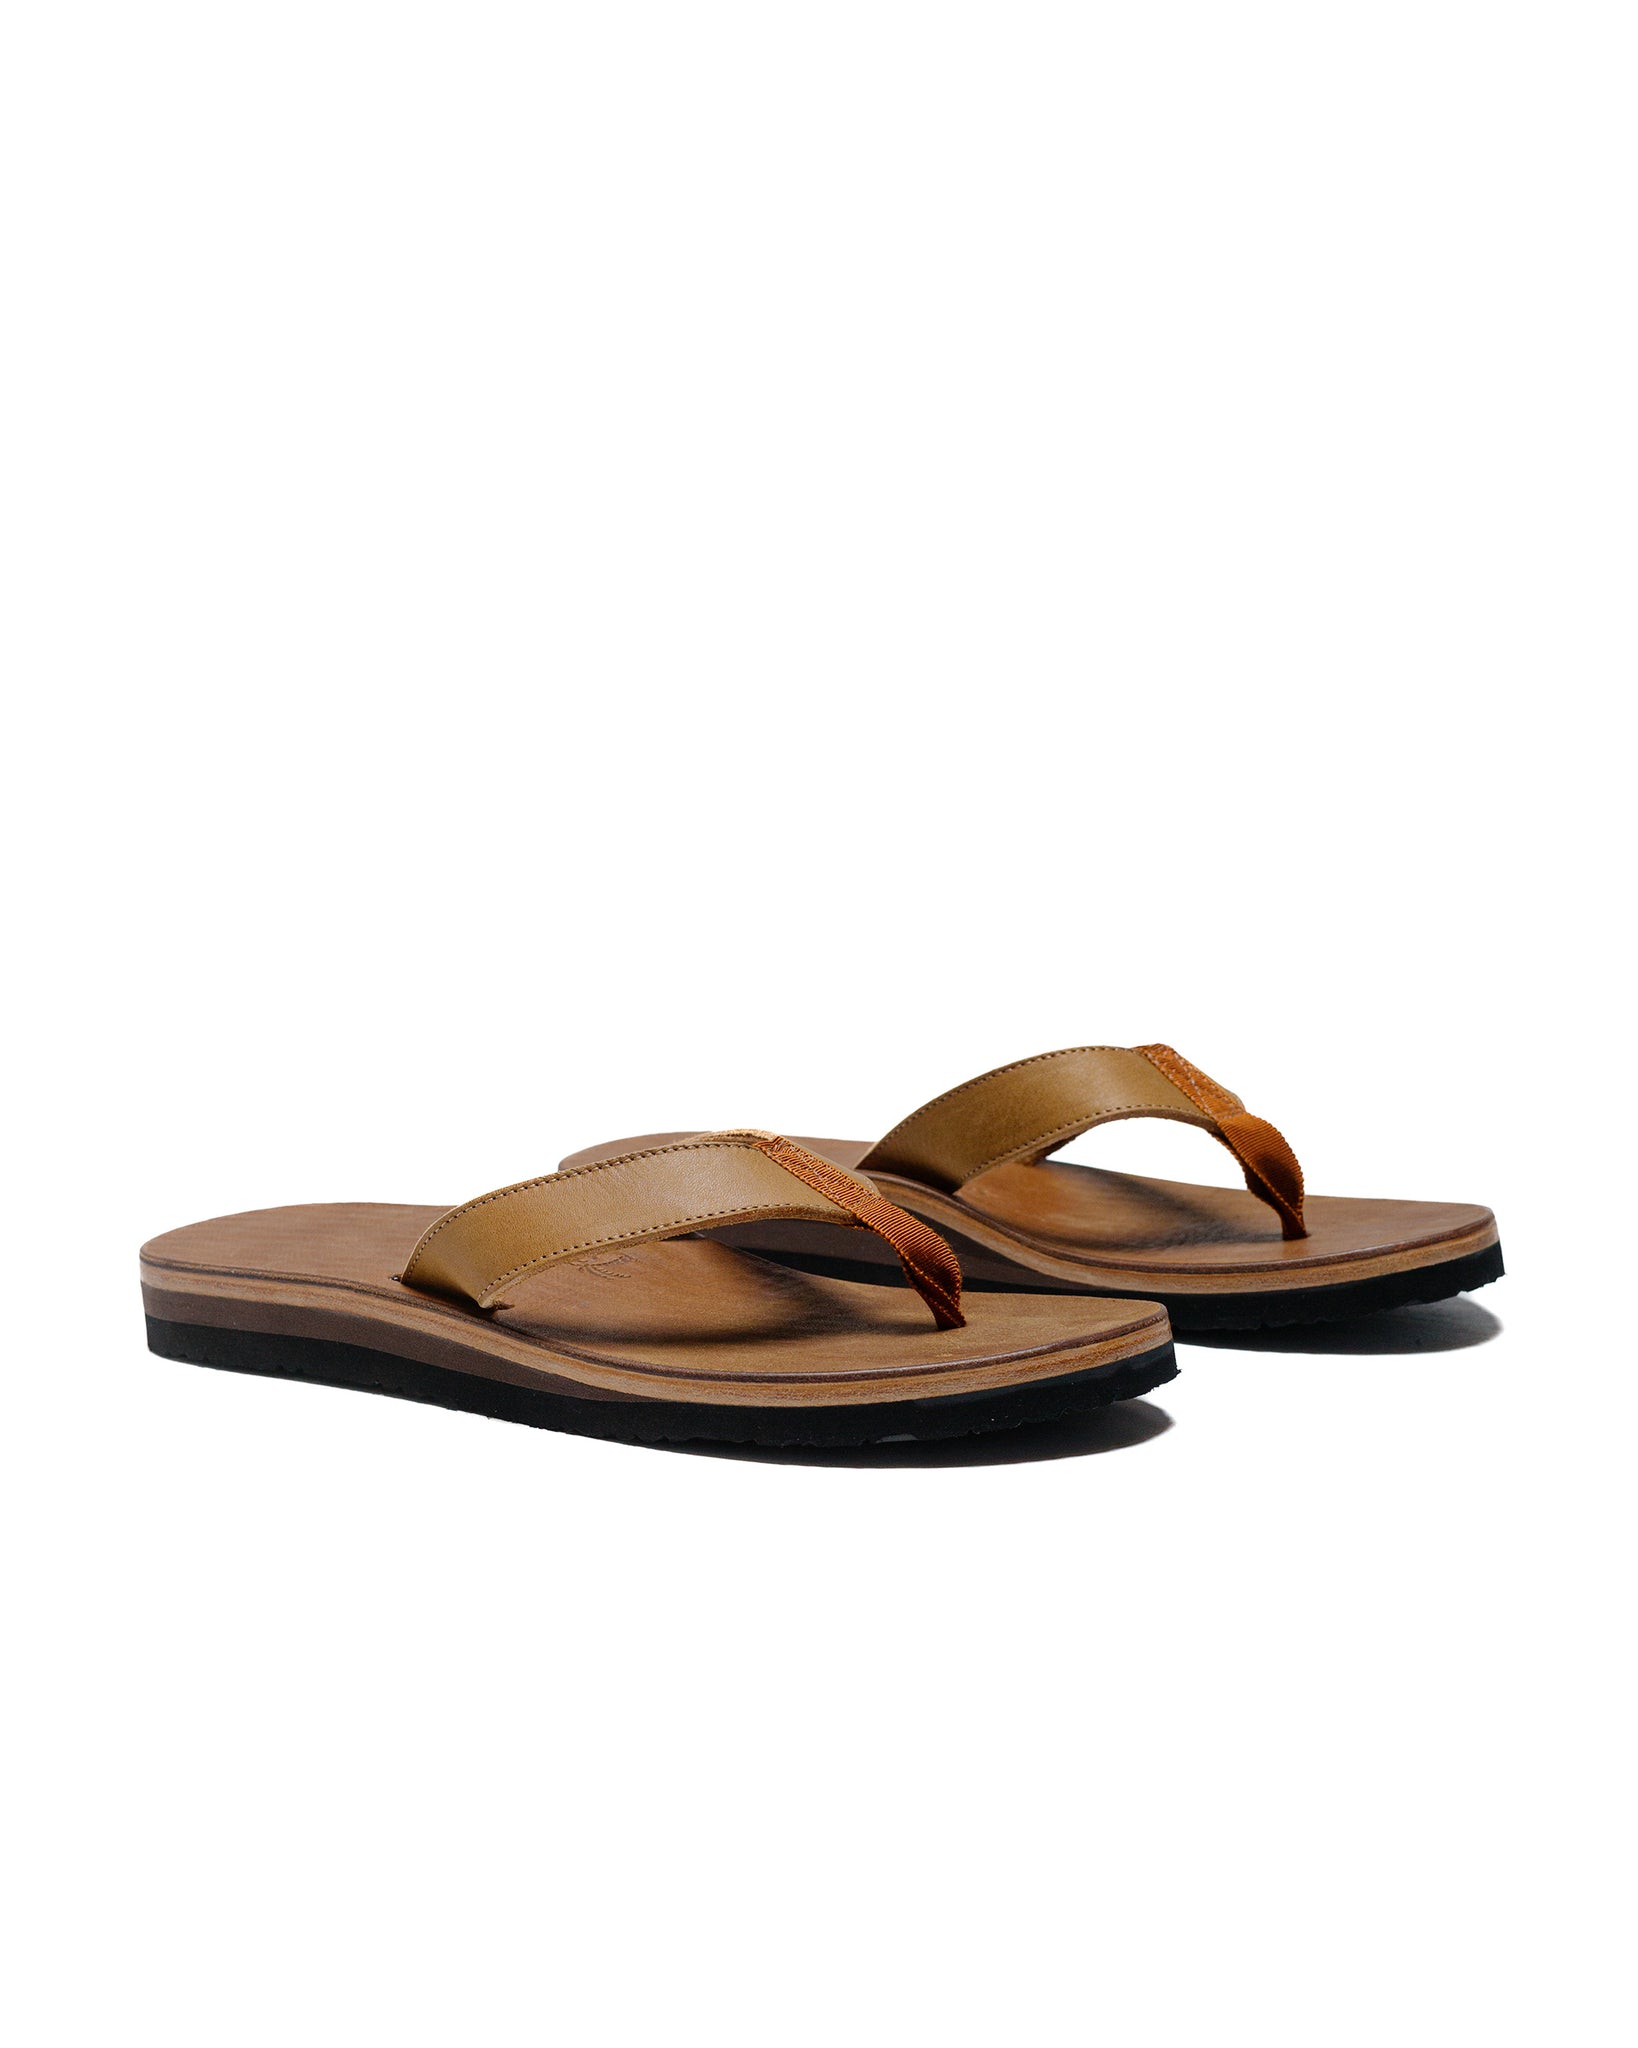 The Real McCoy's MA24011 Leather Arched Sandal Raw Sienna side